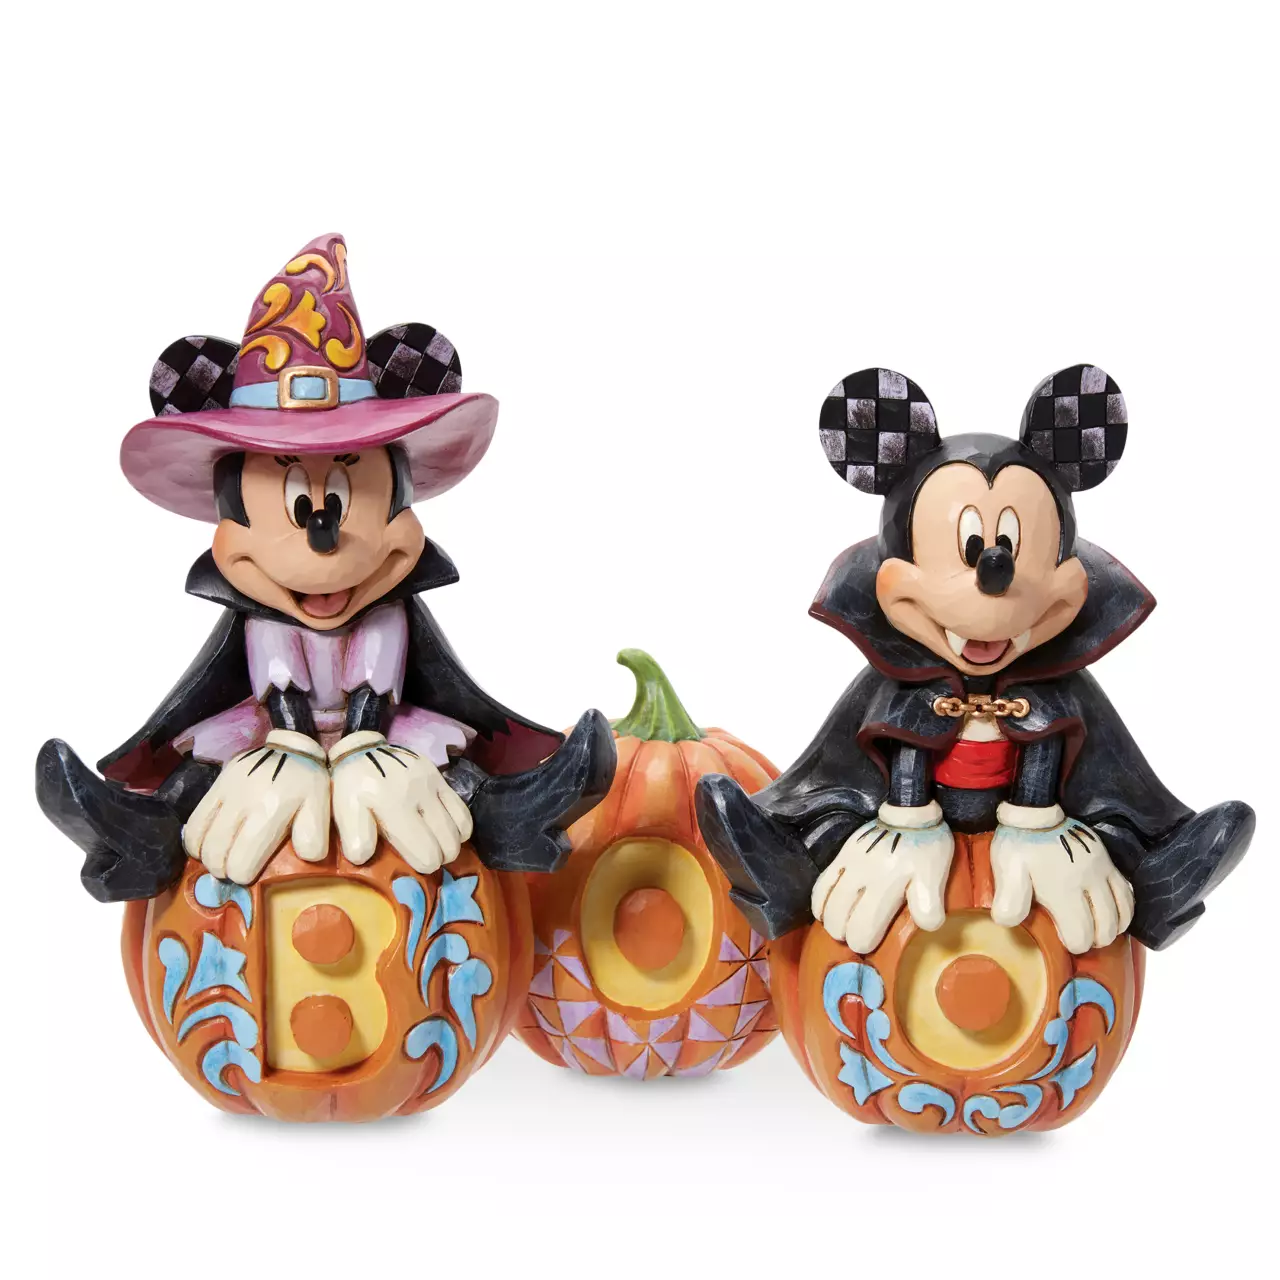 Mickey Mouse and Minnie Mouse Glow-in-the-Dark Halloween Figure by Jim Shore